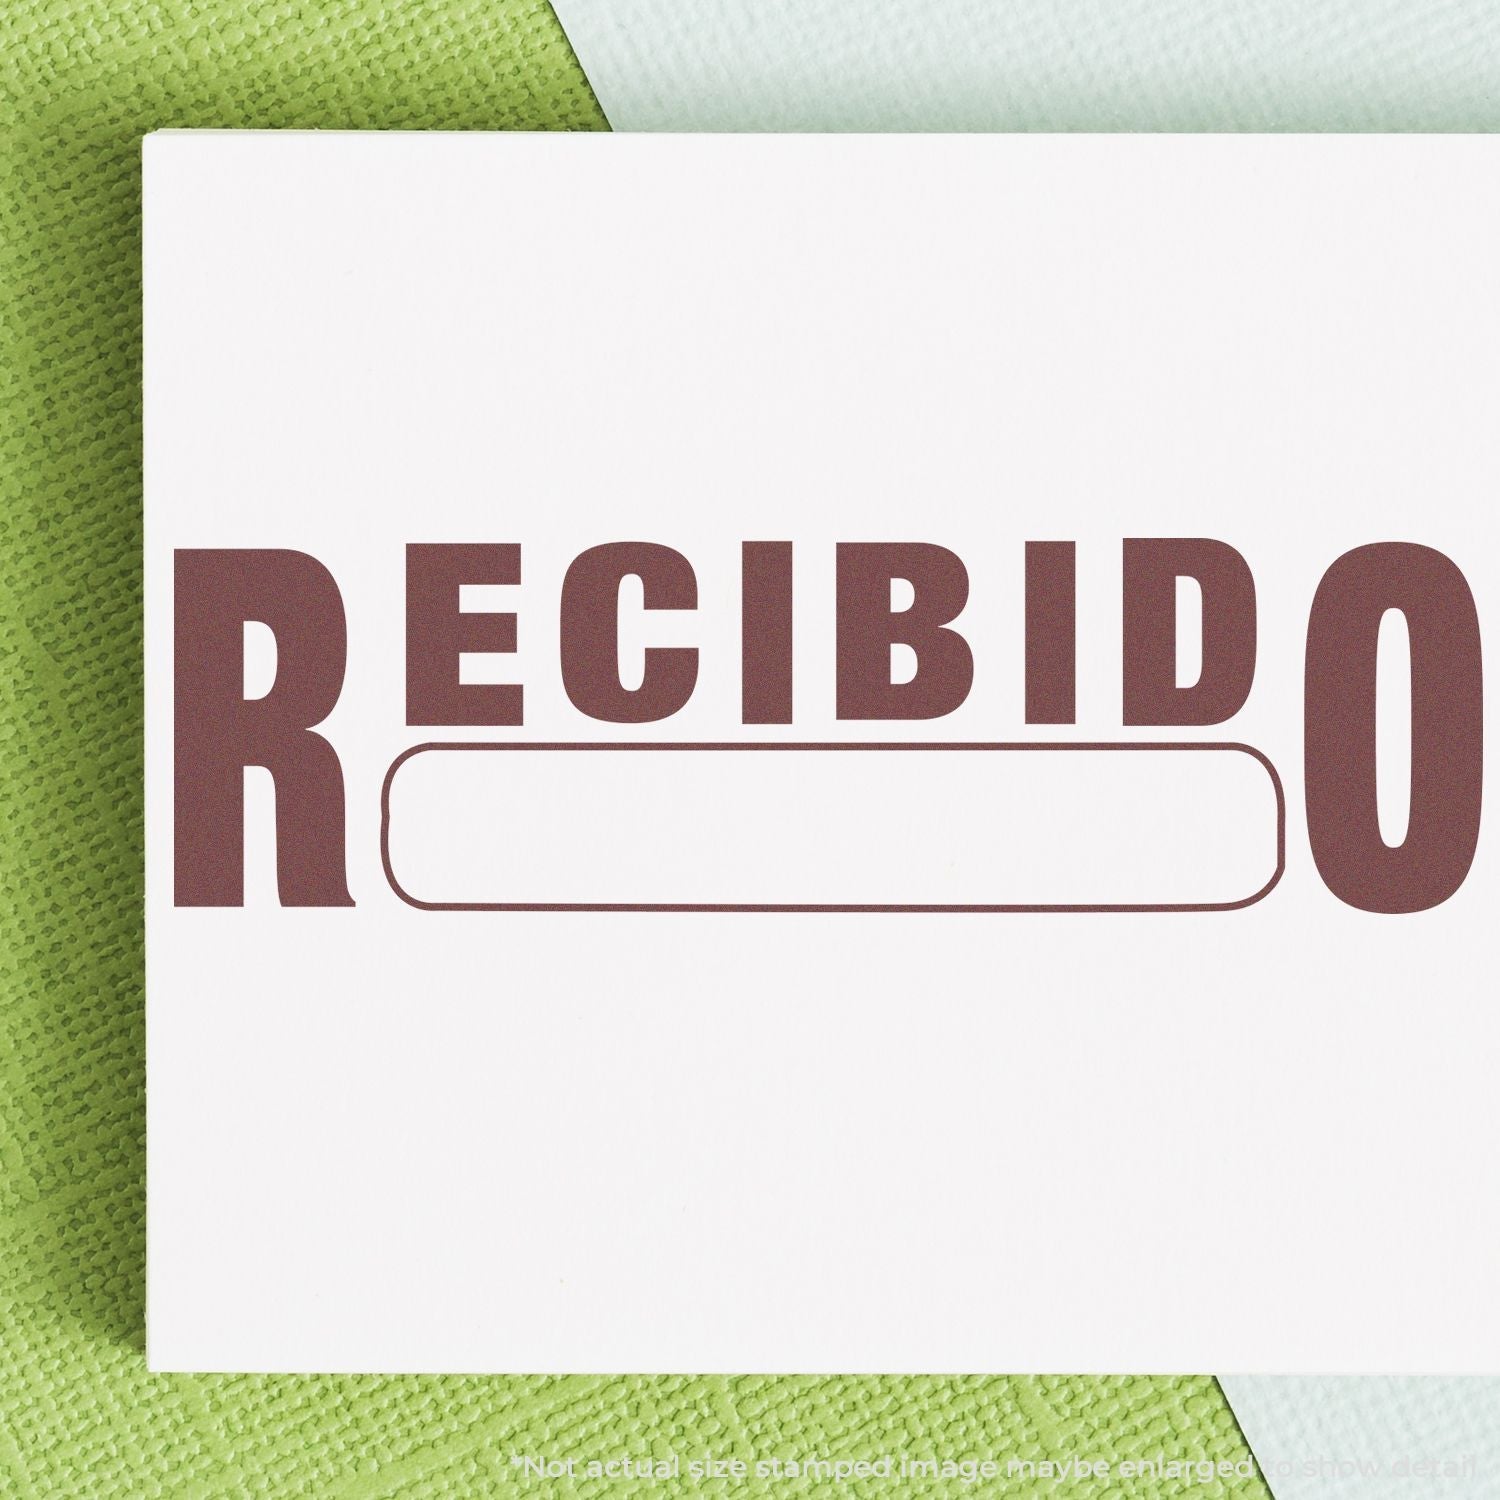 A self-inking stamp with a stamped image showing how the text "RECIBIDO" with a box under it is displayed after stamping.